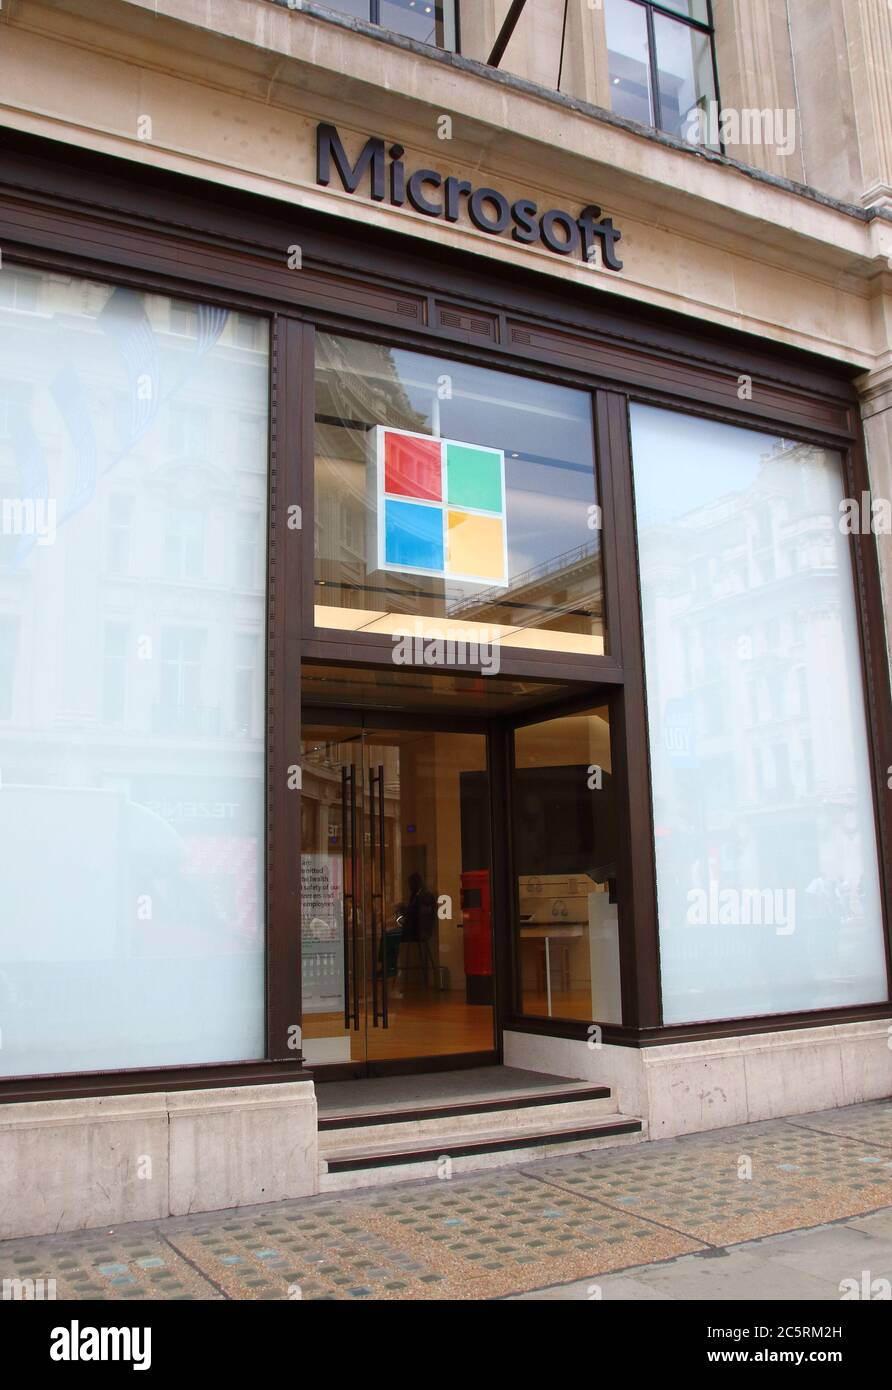 London, UK. 03rd July, 2020. Microsoft logo seen at one of their stores.Microsoft has said it will keep all of its retail locations closed permanently, including London's Flagship store in Oxford Circus which opened just one year ago. The company says it will reimagine some of its spaces that serve its customers, including the Microsoft Experience Centre in London. Credit: SOPA Images Limited/Alamy Live News Stock Photo